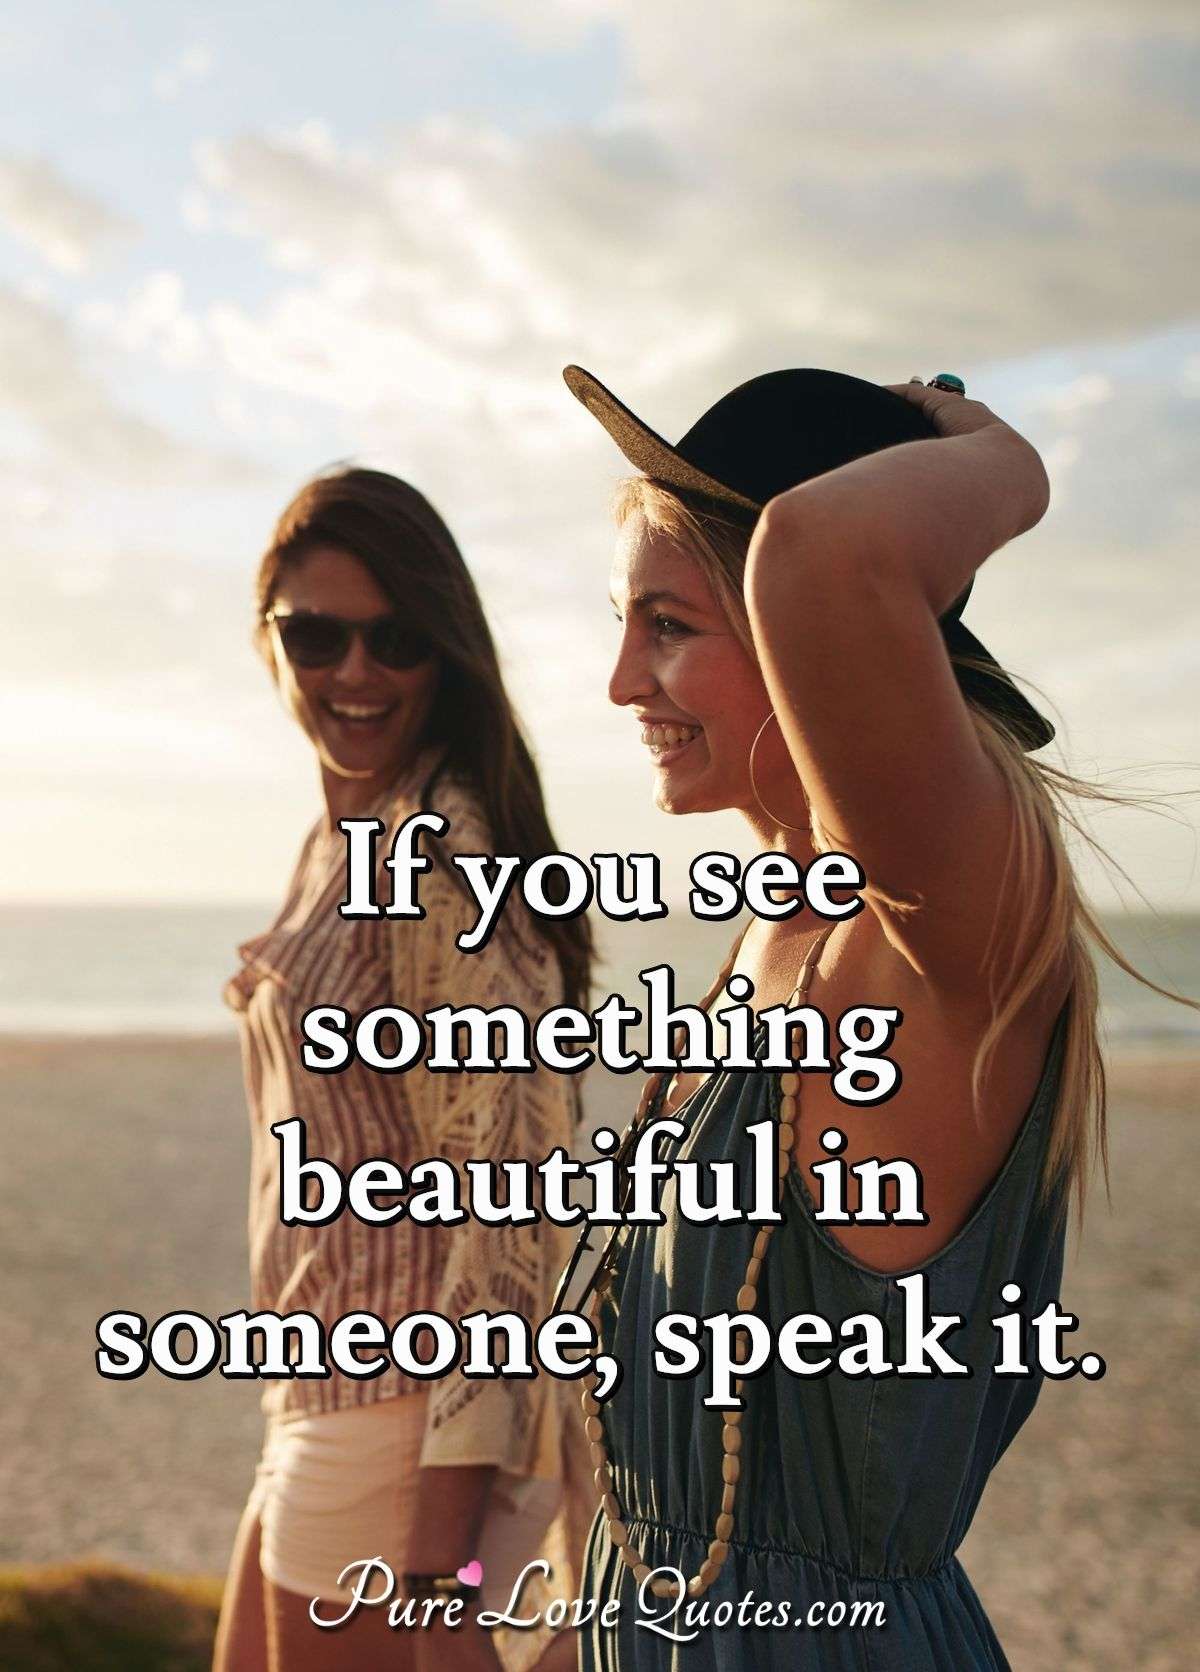 If you see something beautiful in someone, speak it. - Anonymous